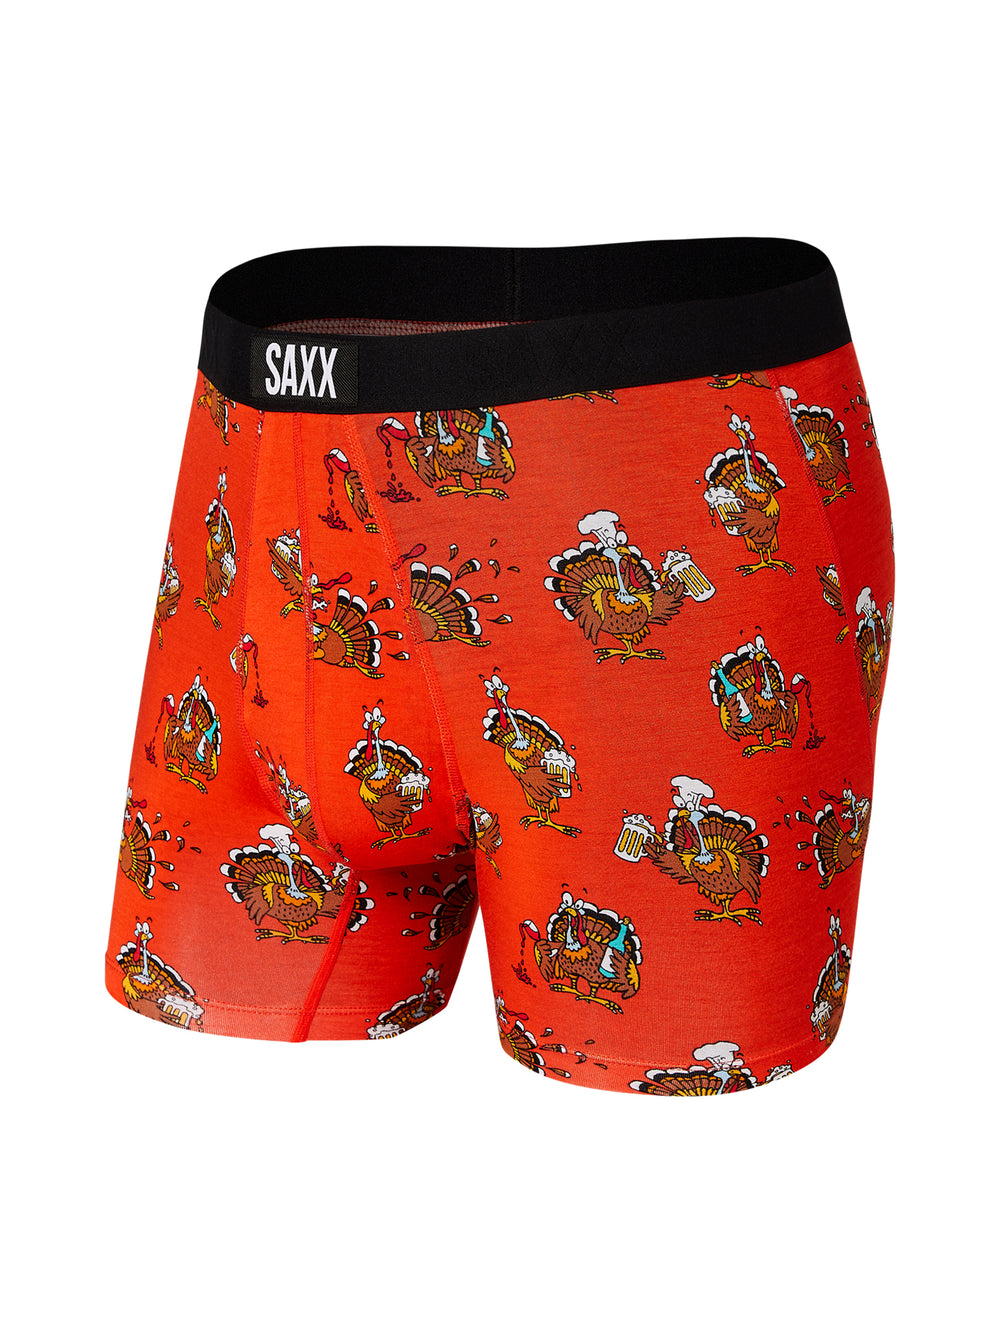 SAXX VIBE BOXER BRIEFING - DRINKSGIVING - CLEARANCE